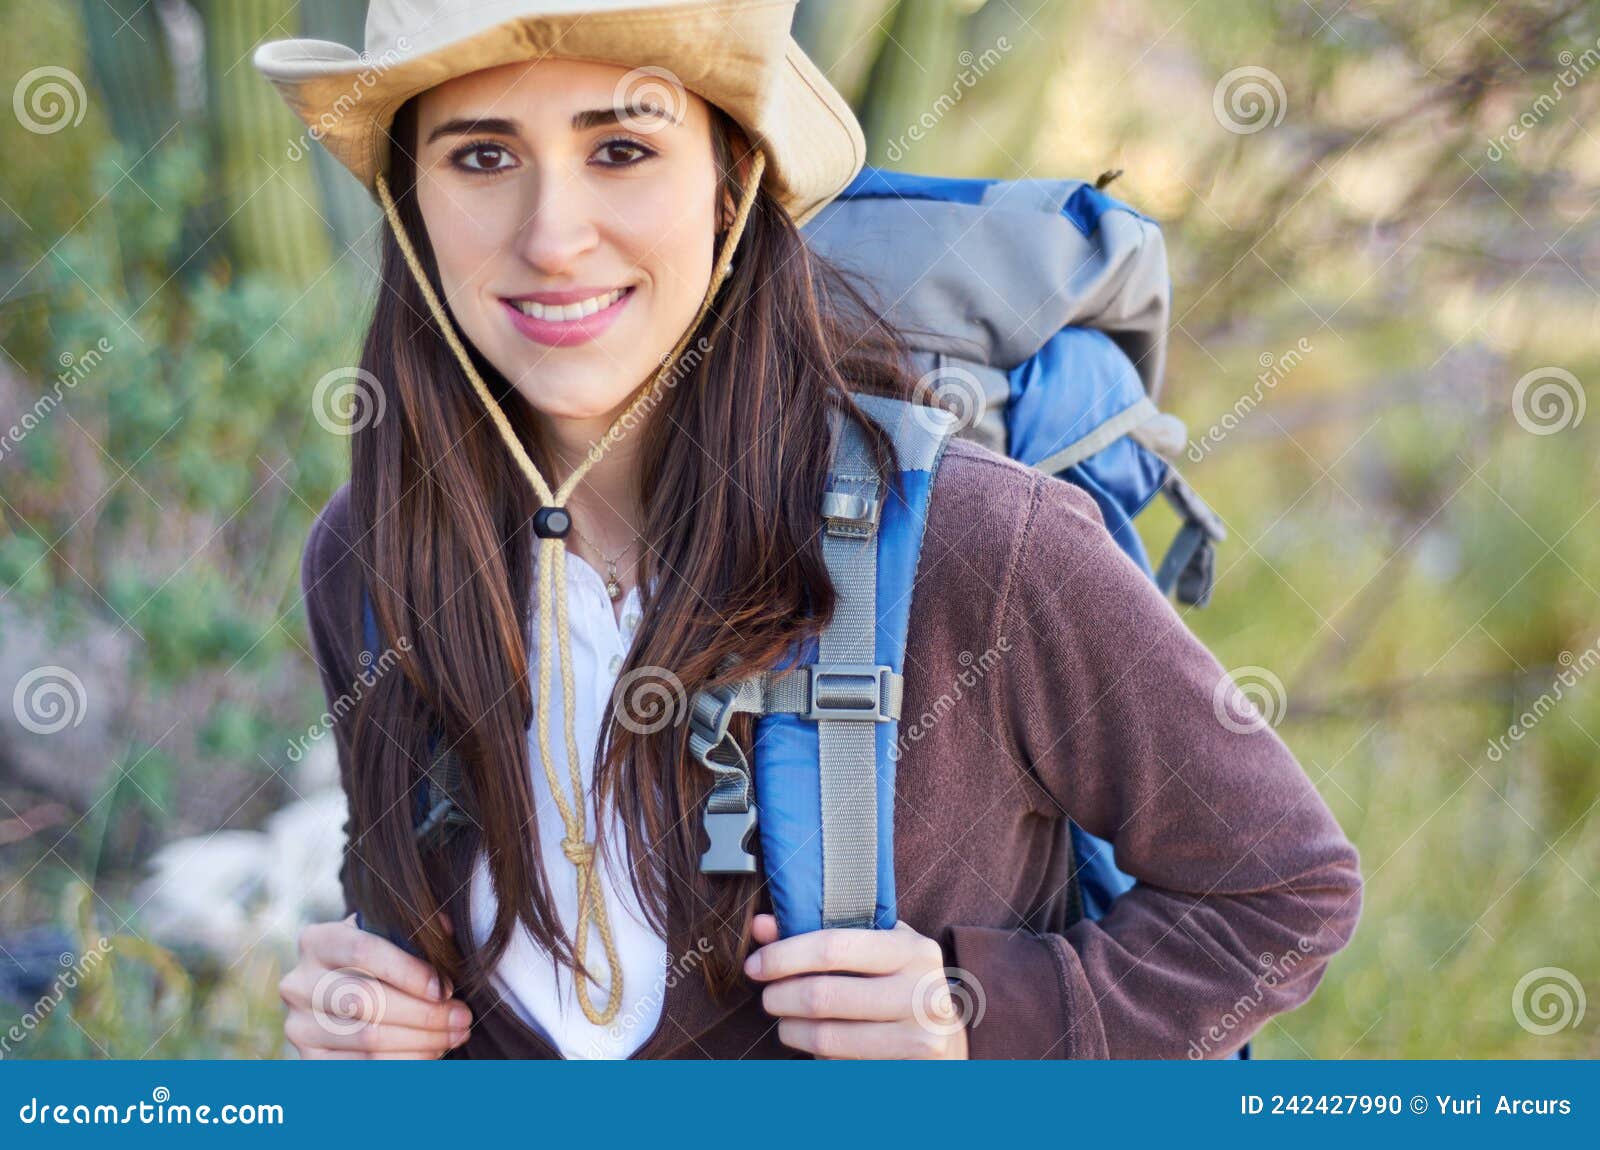 Fresh Air at Its Best. a Gorgeous Young Woman Hiking with Her Backpack ...